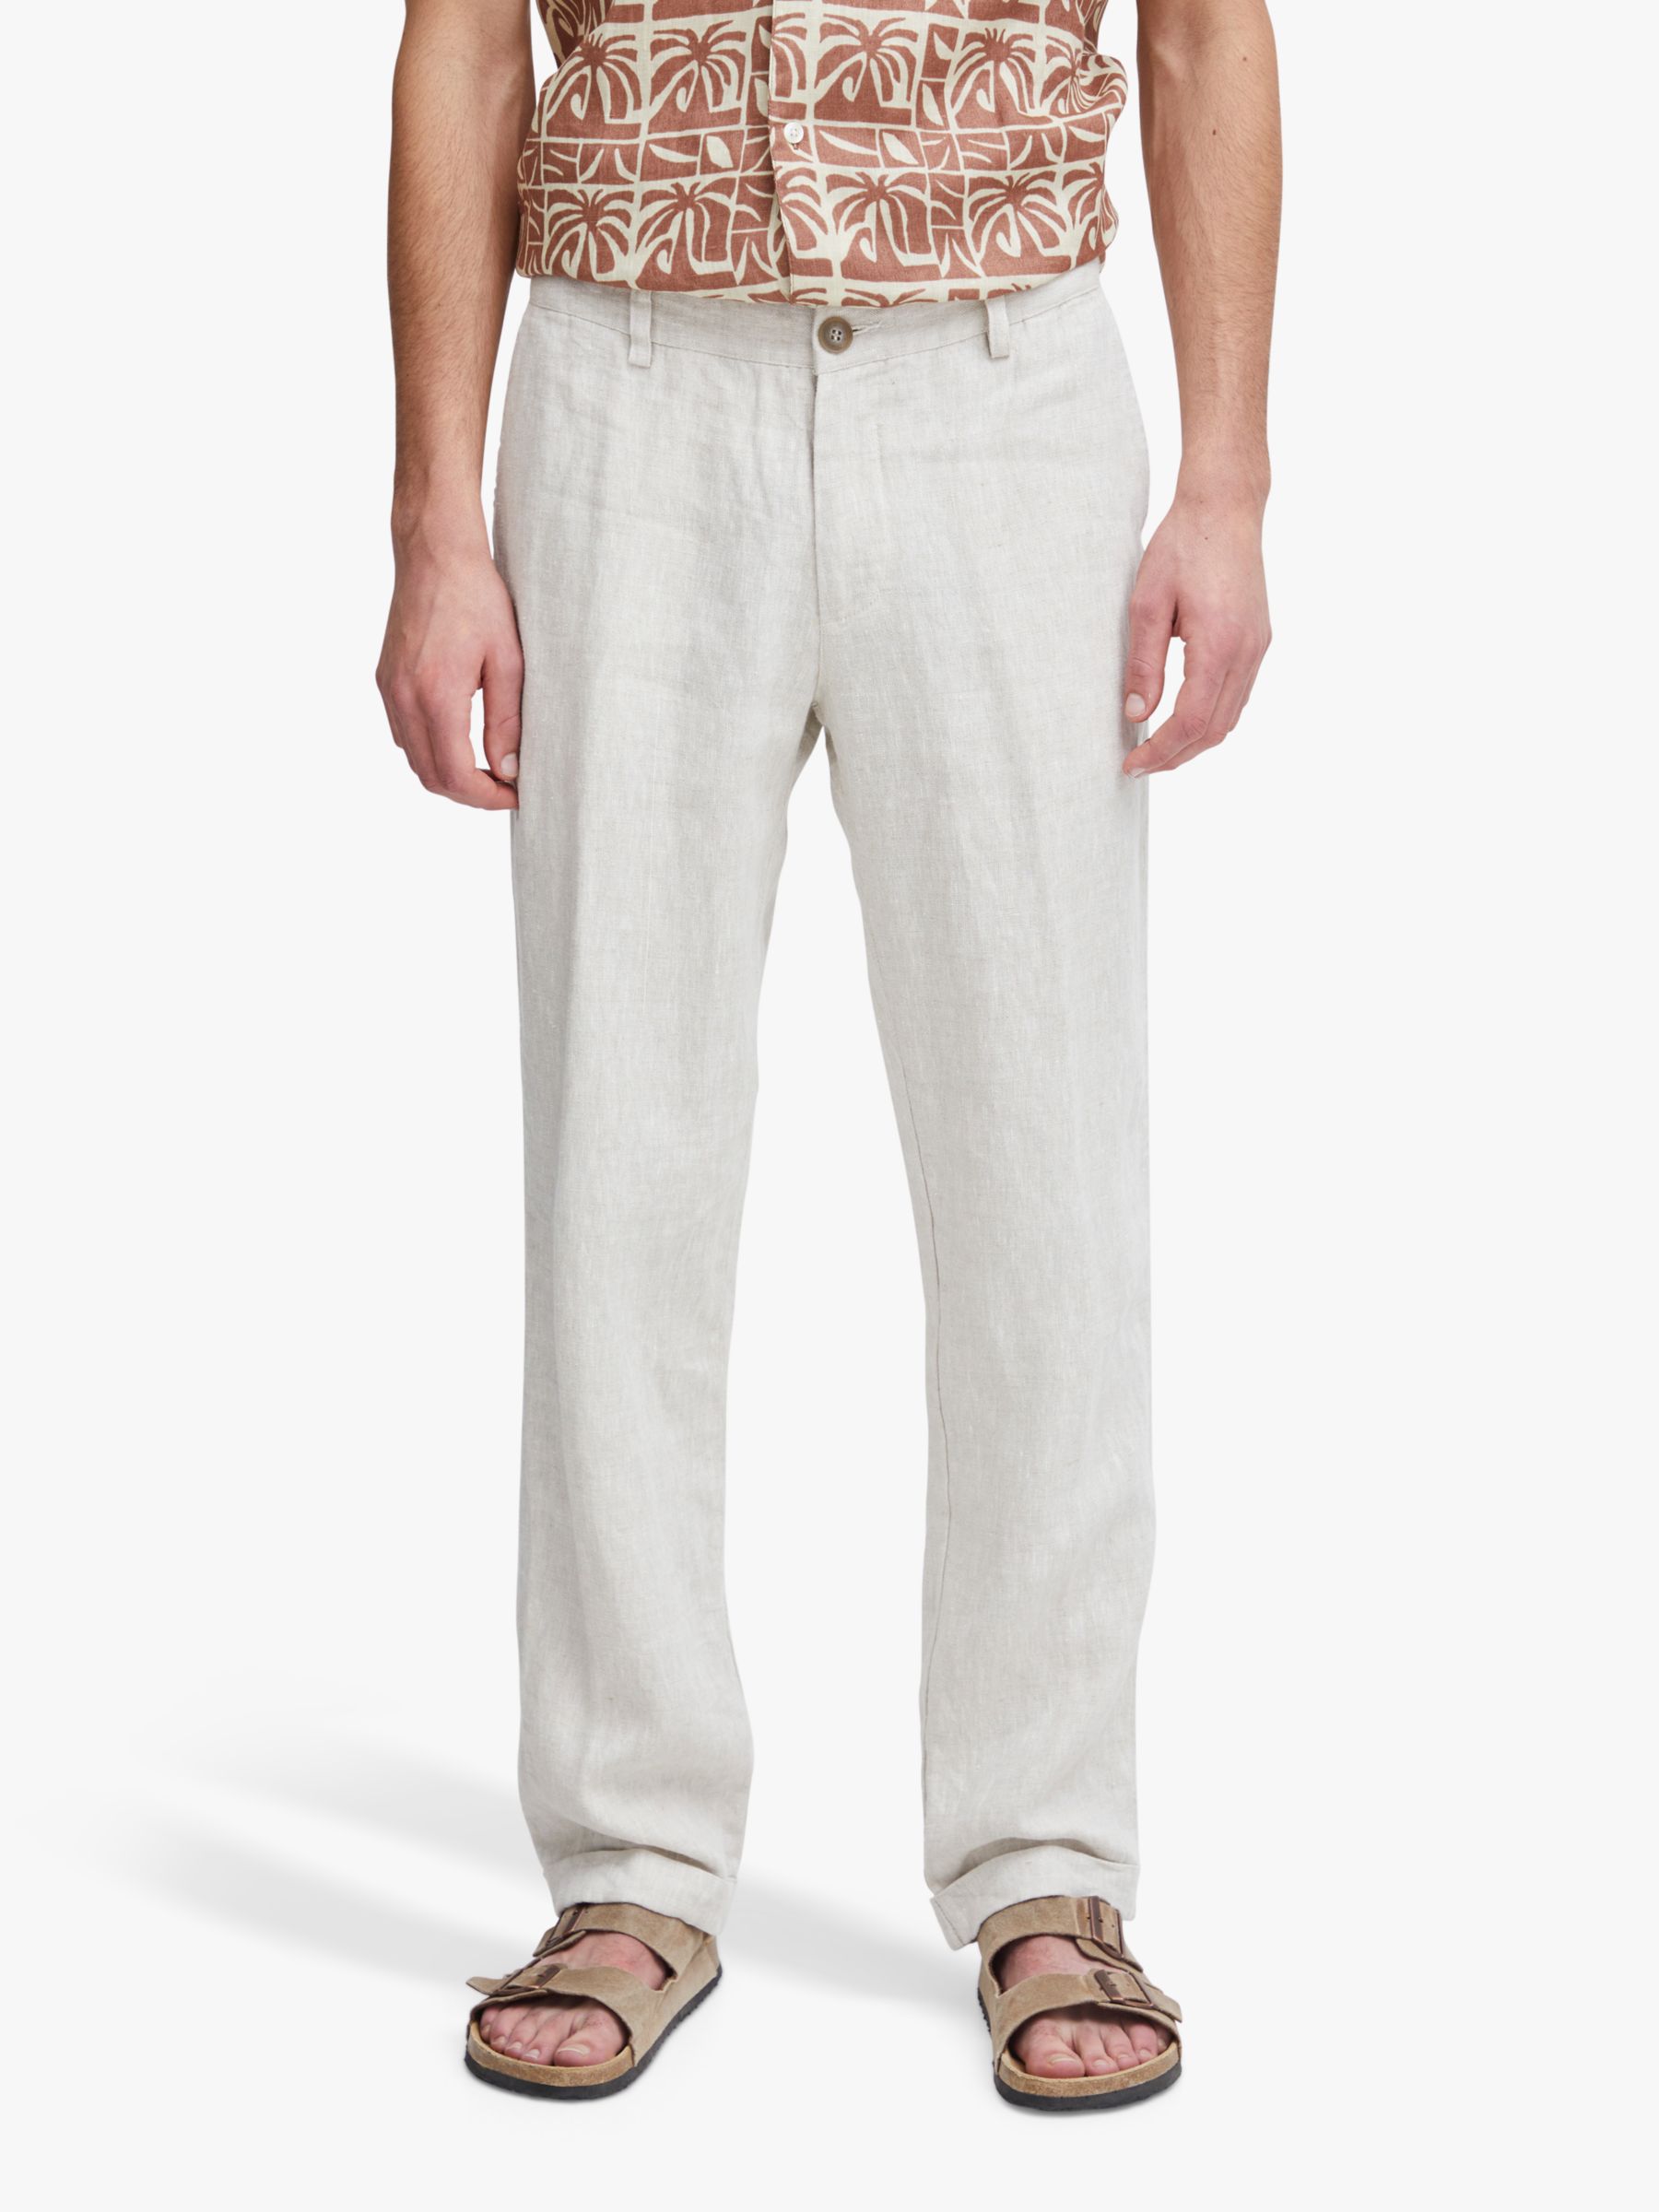 Buy Casual Friday Pandrup Regular Fit Stretch Trousers Online at johnlewis.com